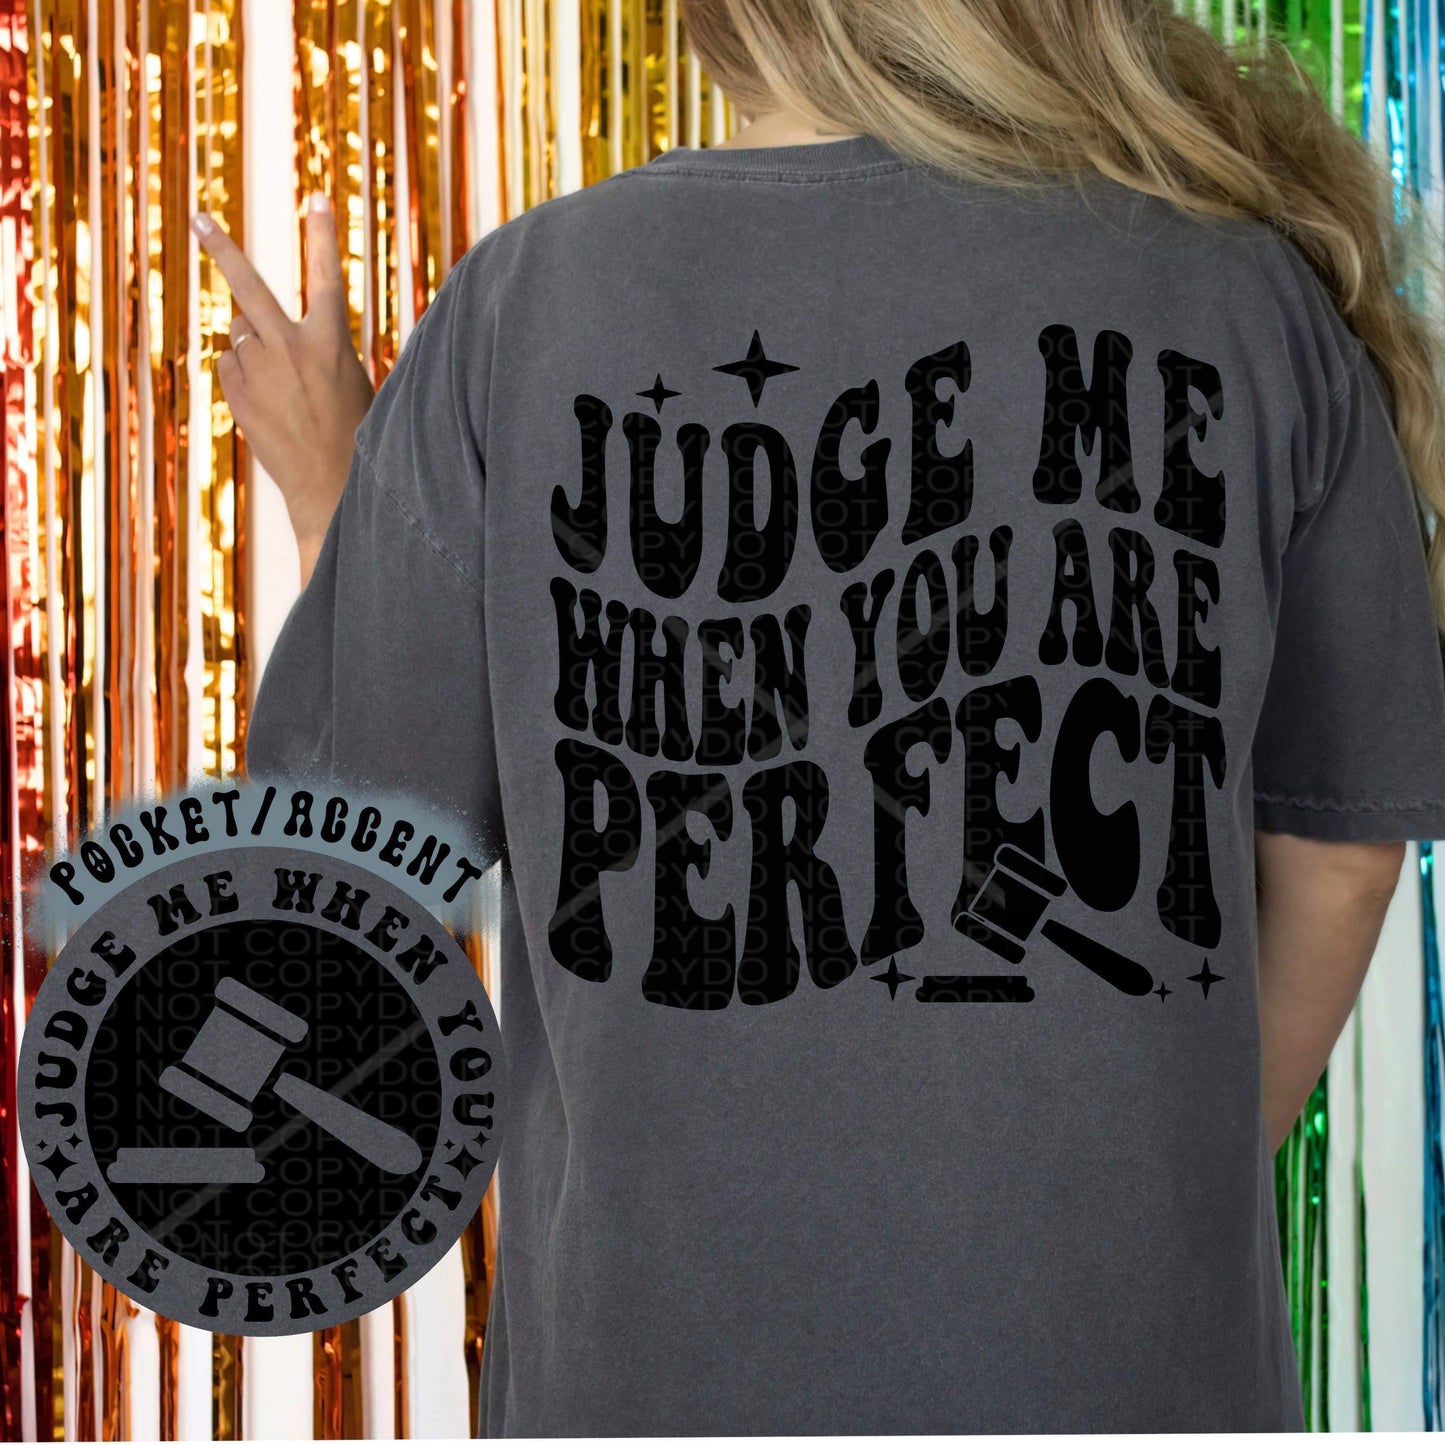 Judge me when you are perfect- Front & Back *Ollie & Co. Exclusive*